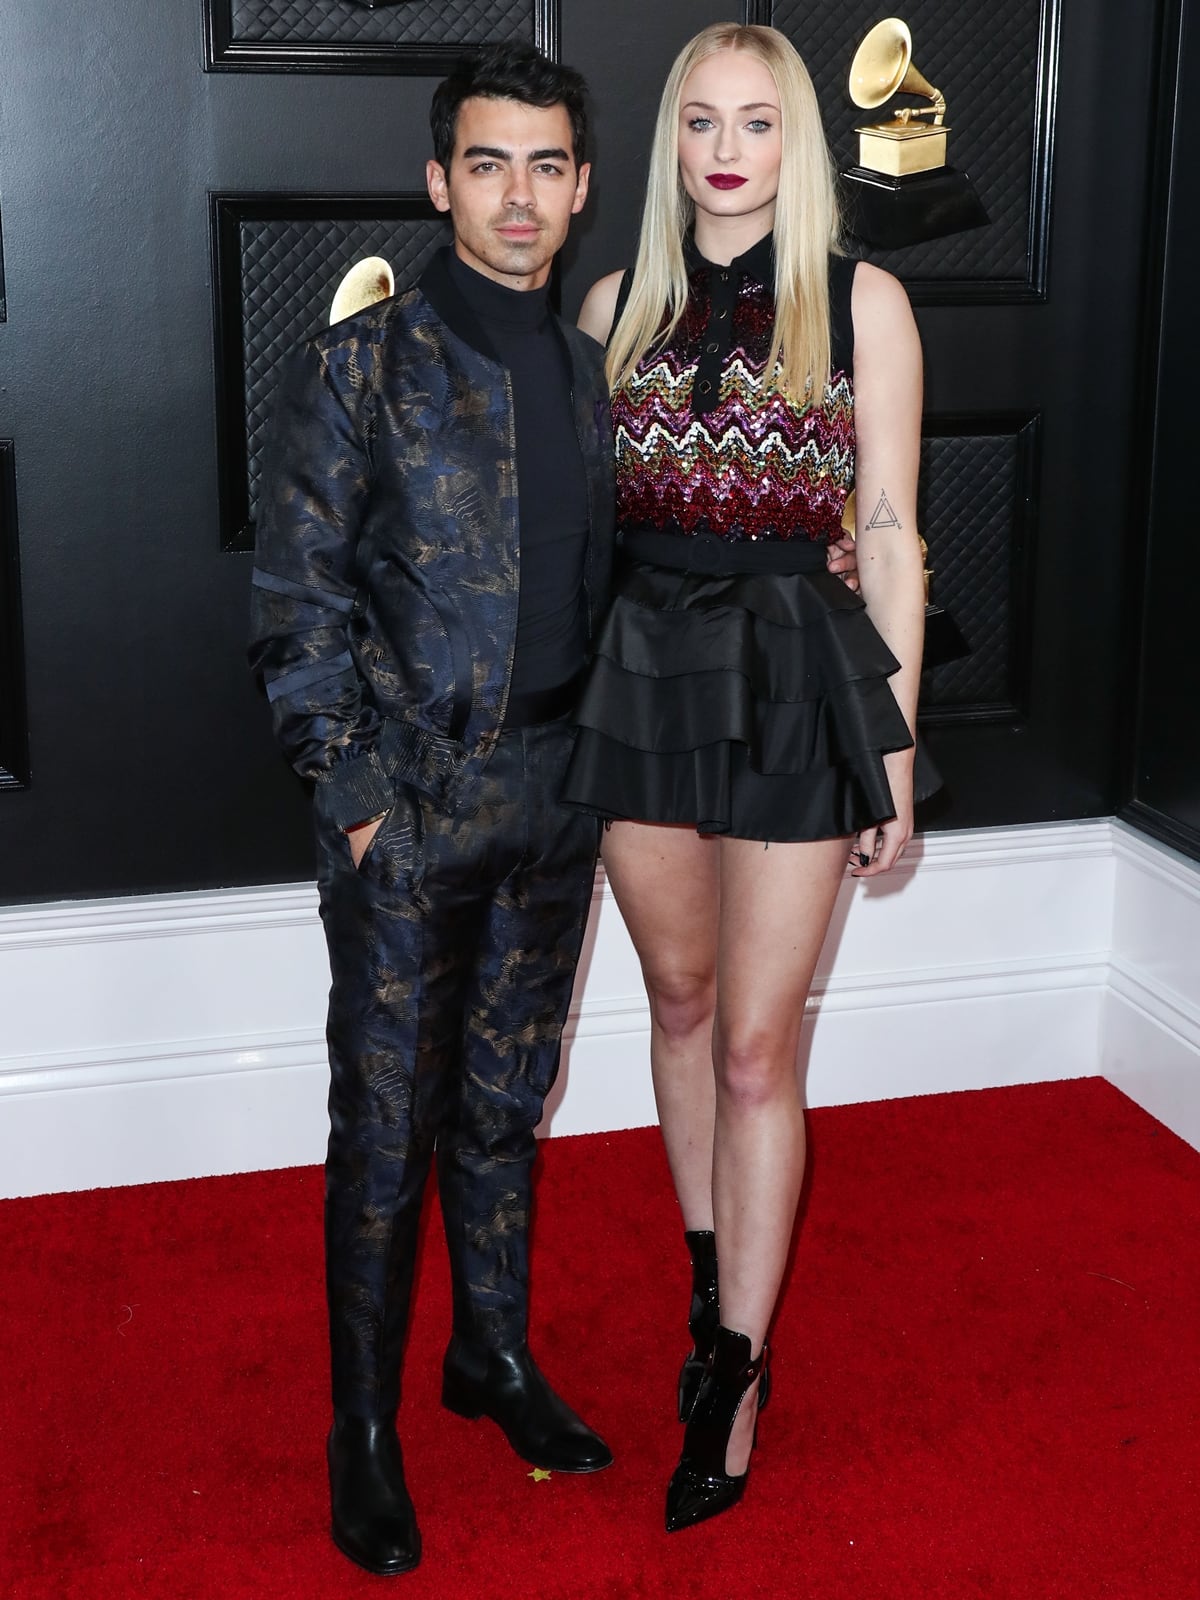 Sophie Turner stands at 5ft 8 ¾ (174.6 cm) in height, while Joe Jonas is 5ft 7 ½ (171.5 cm) tall